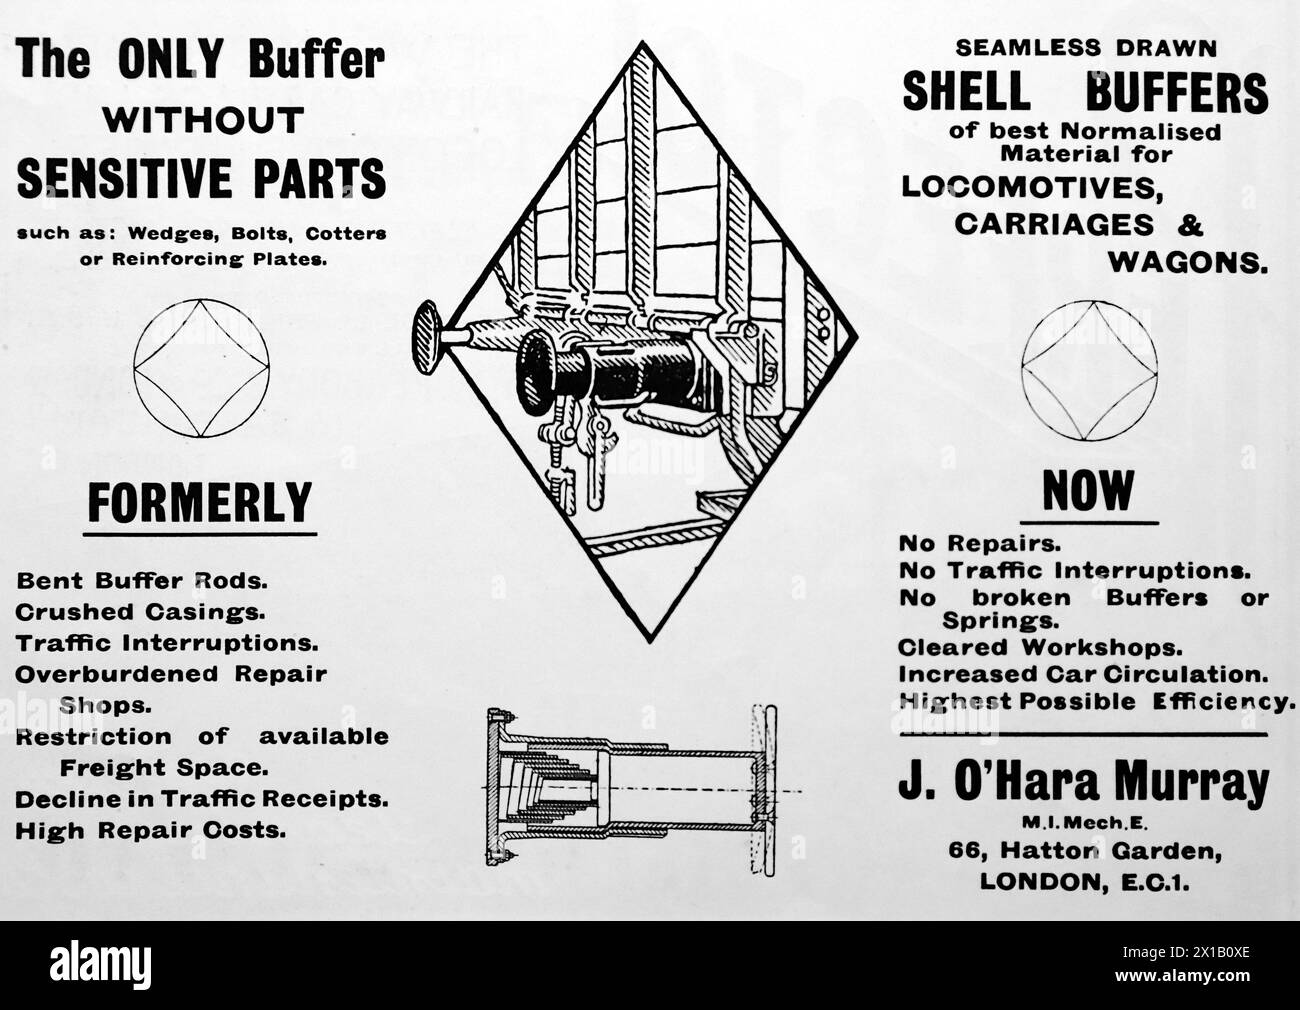 Advertisement for J. O’Hara Murray of Hatton Garden, London. Seamless drawn shell buffers, the only buffer without sensitive parts. From an original publication dated 15 May 1924, this helps to give an insight into public transport, and the railways in particular, of the 1920s. Stock Photo